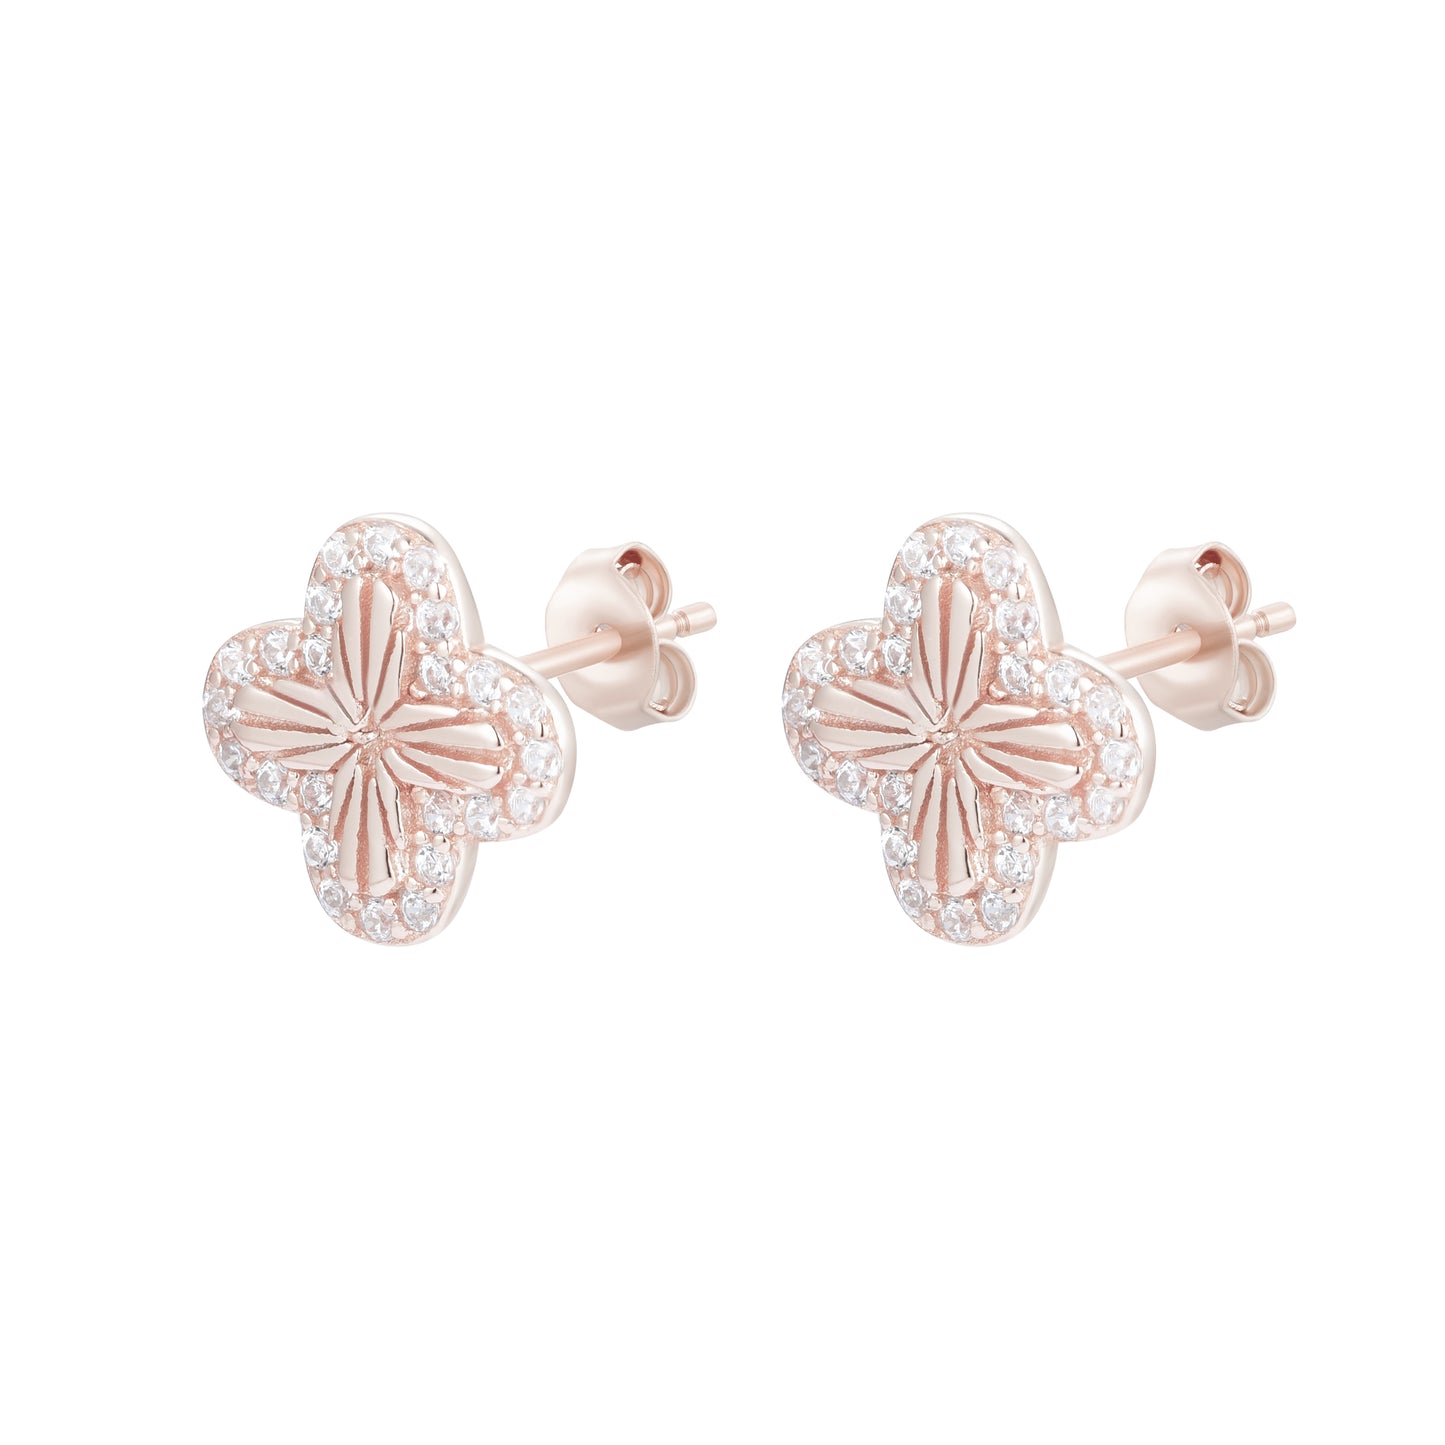 TUSCANY CLOVER ROSE GOLD EAR STUDS